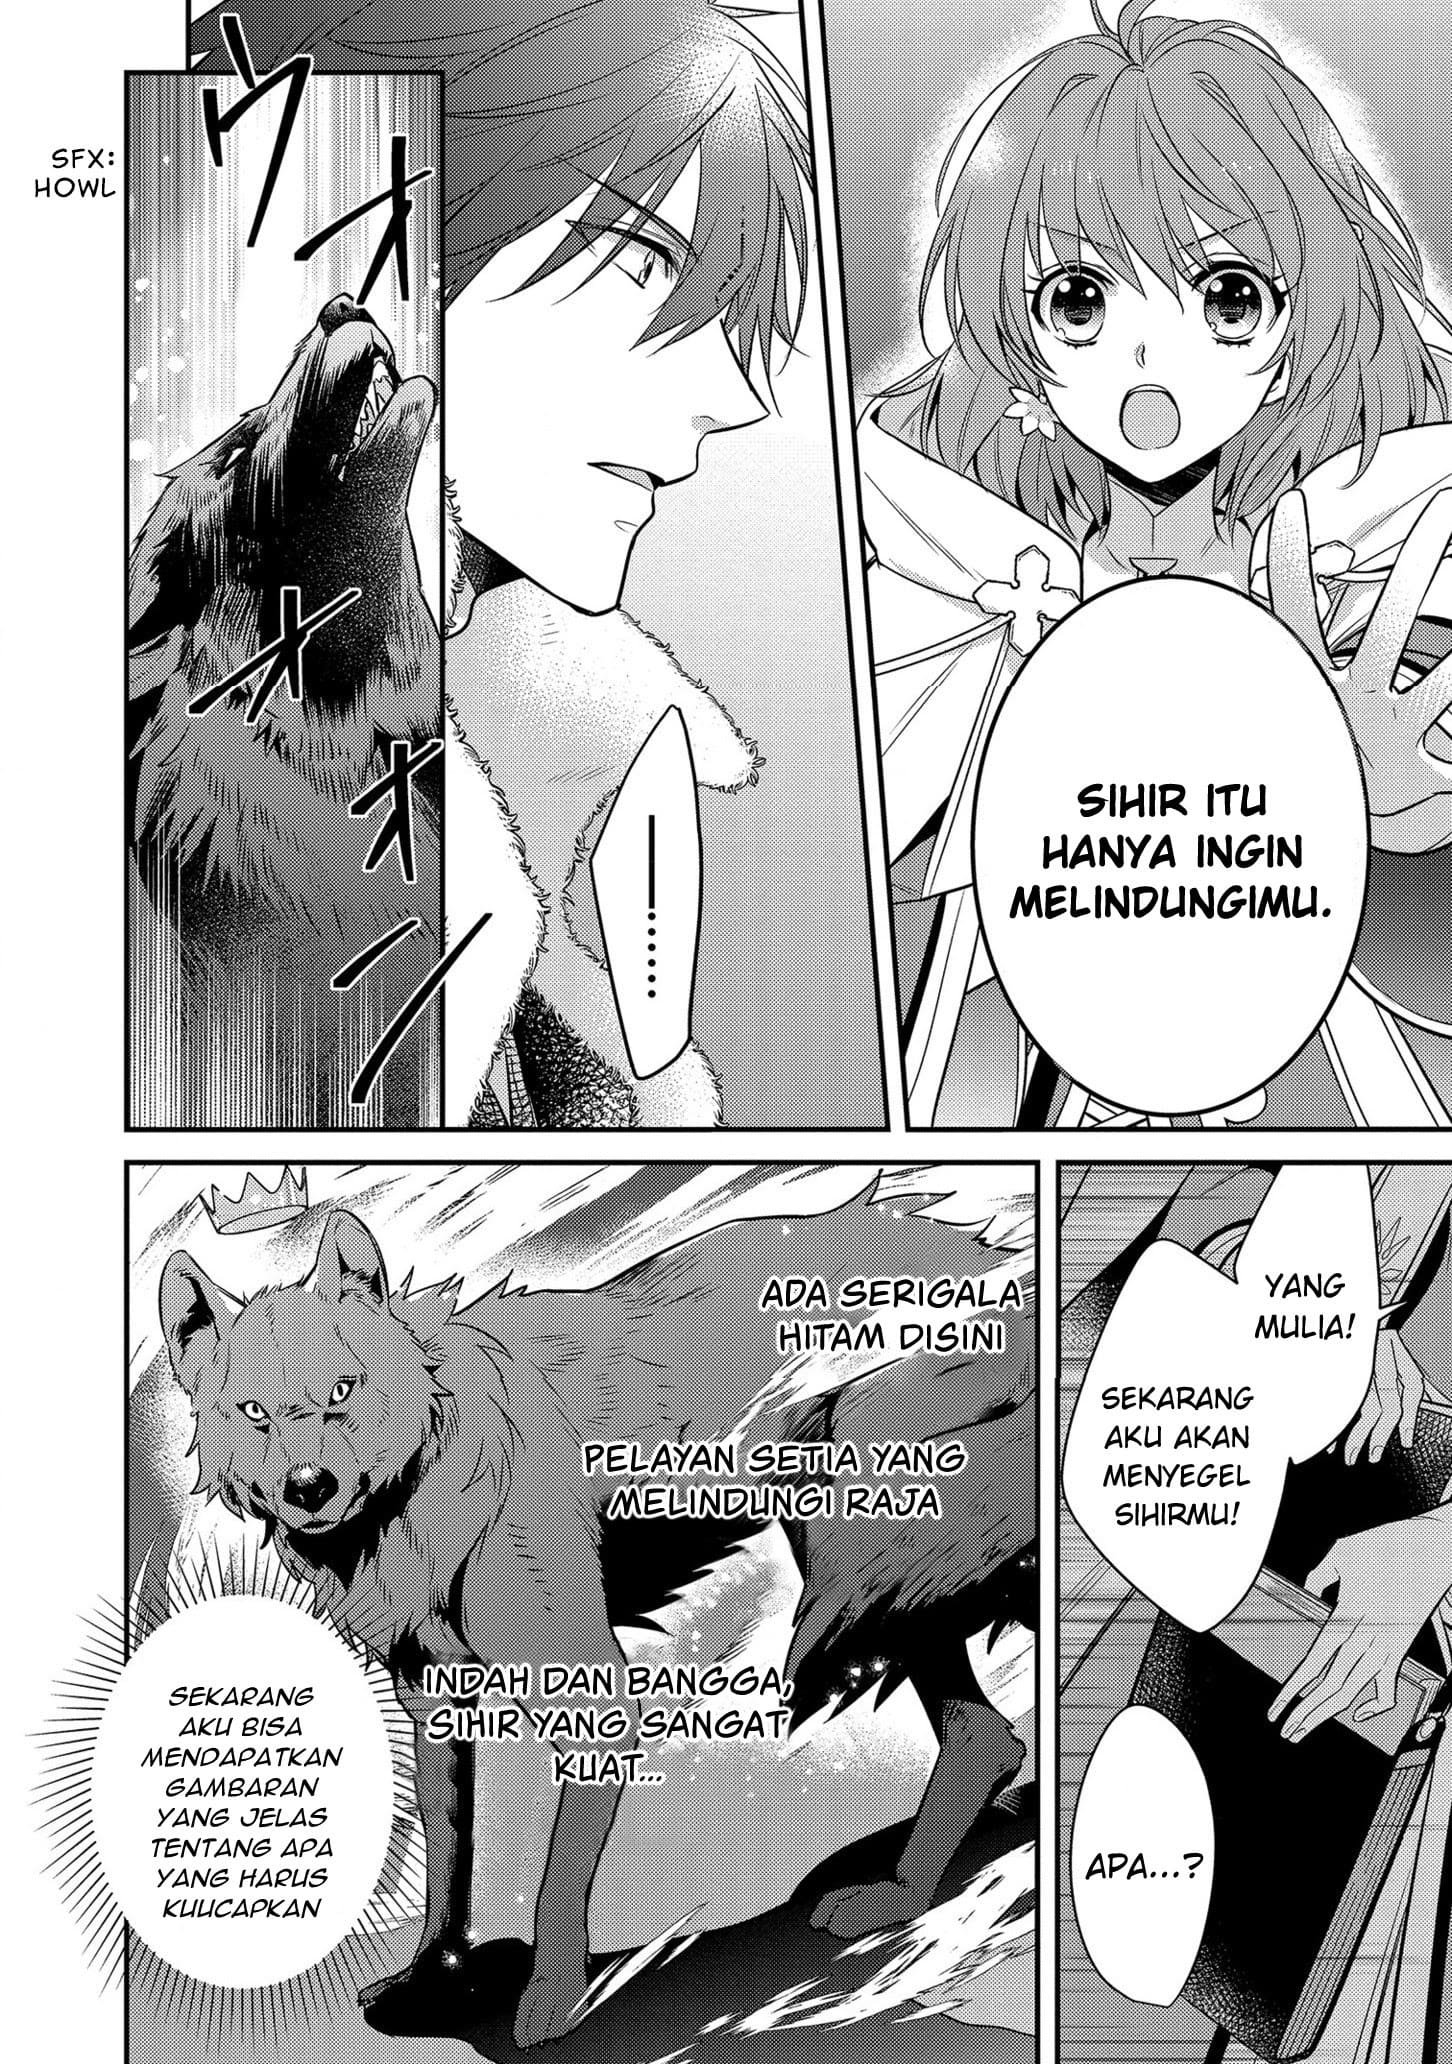 Baca The Tyrannical Holy King Wants to Dote on the Cheat Girl, but Right Now She’s Too Obsessed With Magic!!! Chapter 2.1  - GudangKomik